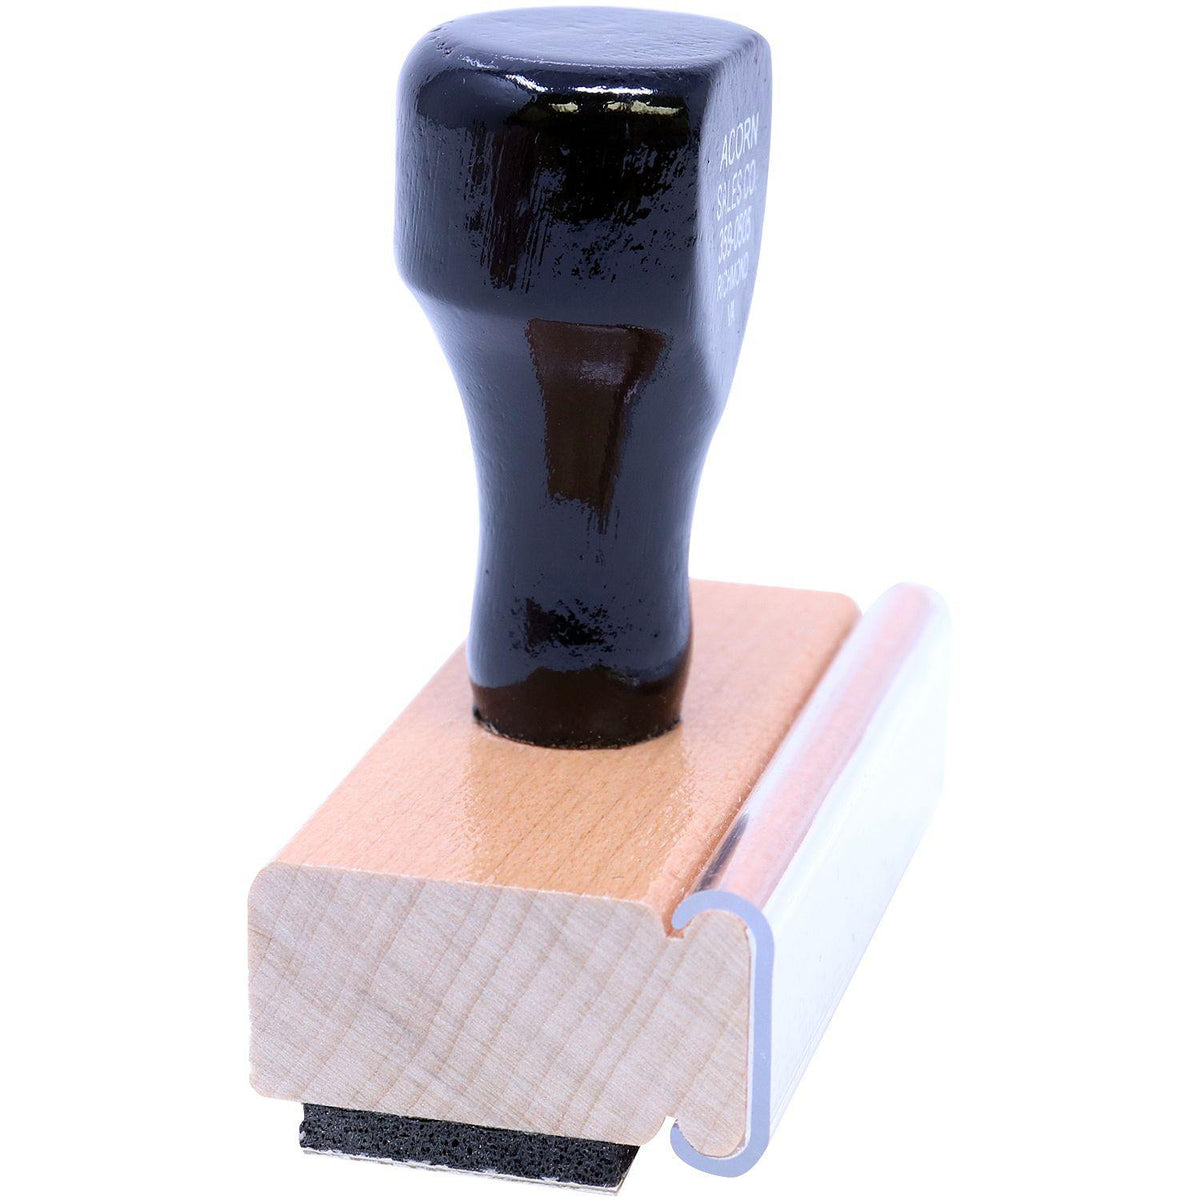 Side View of Summer Term Recommended Rubber Stamp at an Angle